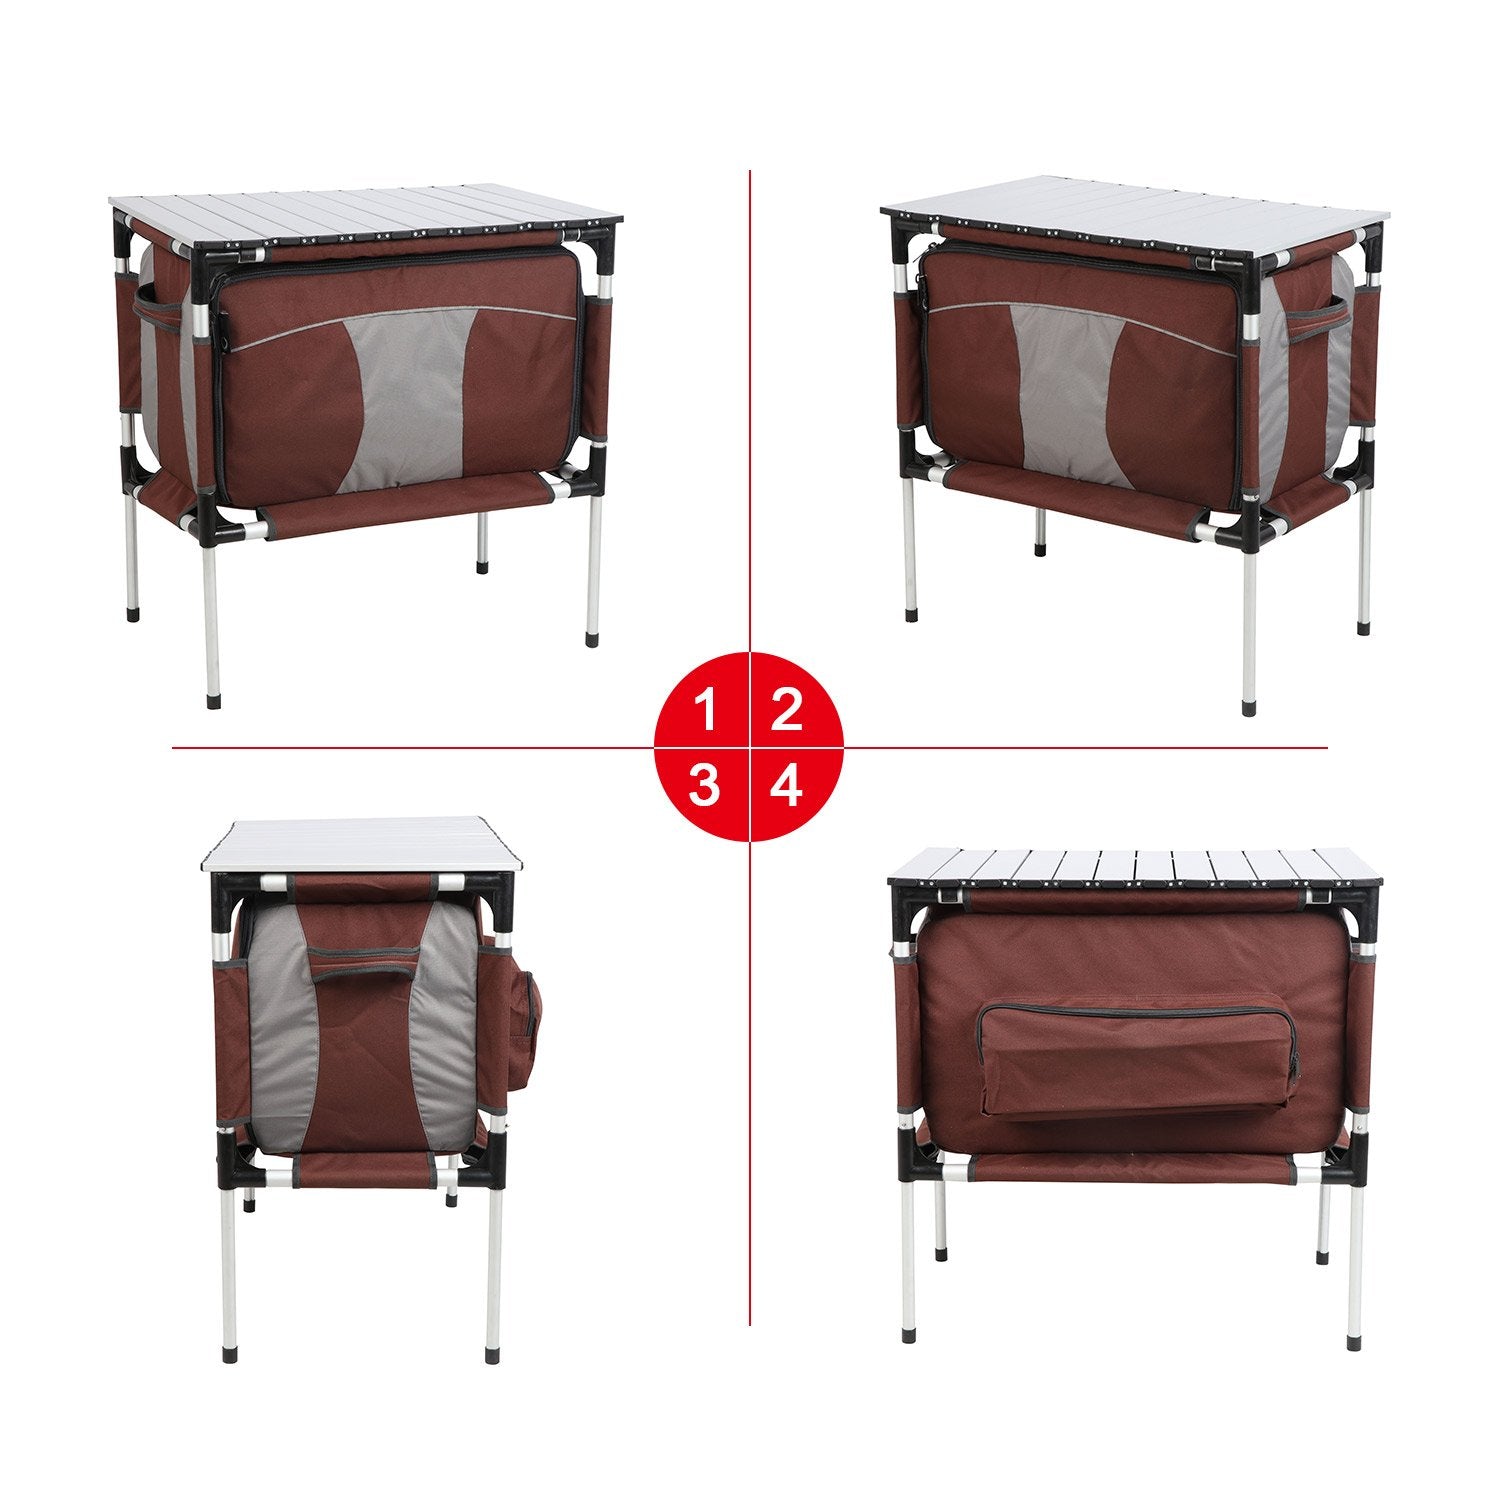 PORTAL Multifunctional Folding Camp Table Aluminum Lightweight Picnic Organizer with Large Zippered Compartment contains Cooler Storage Bags for BBQ, Party, Camping, Kitchen